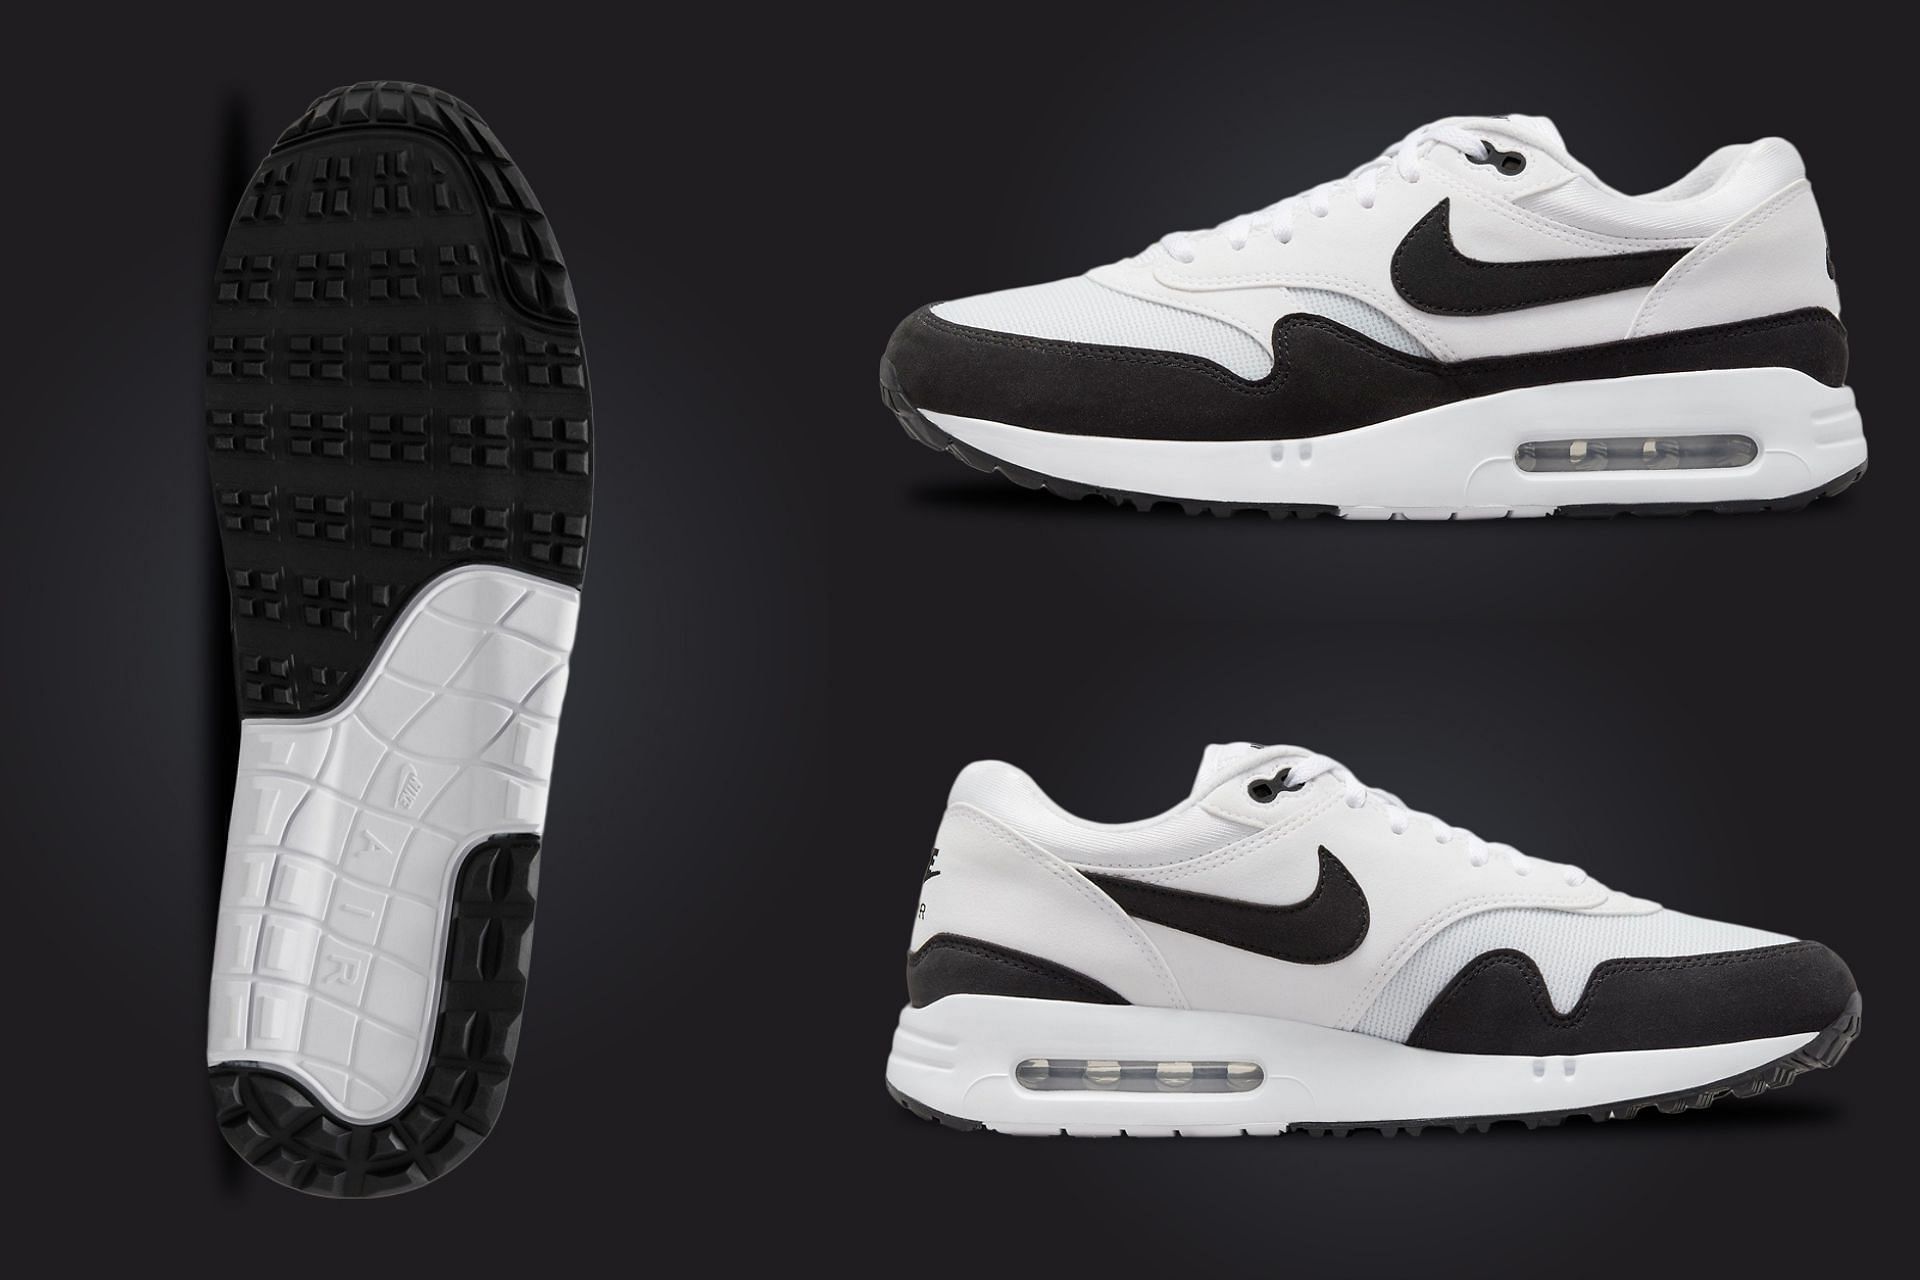 The Nike Air Max 1 Black White Releases Holiday 2023 - Sneaker News